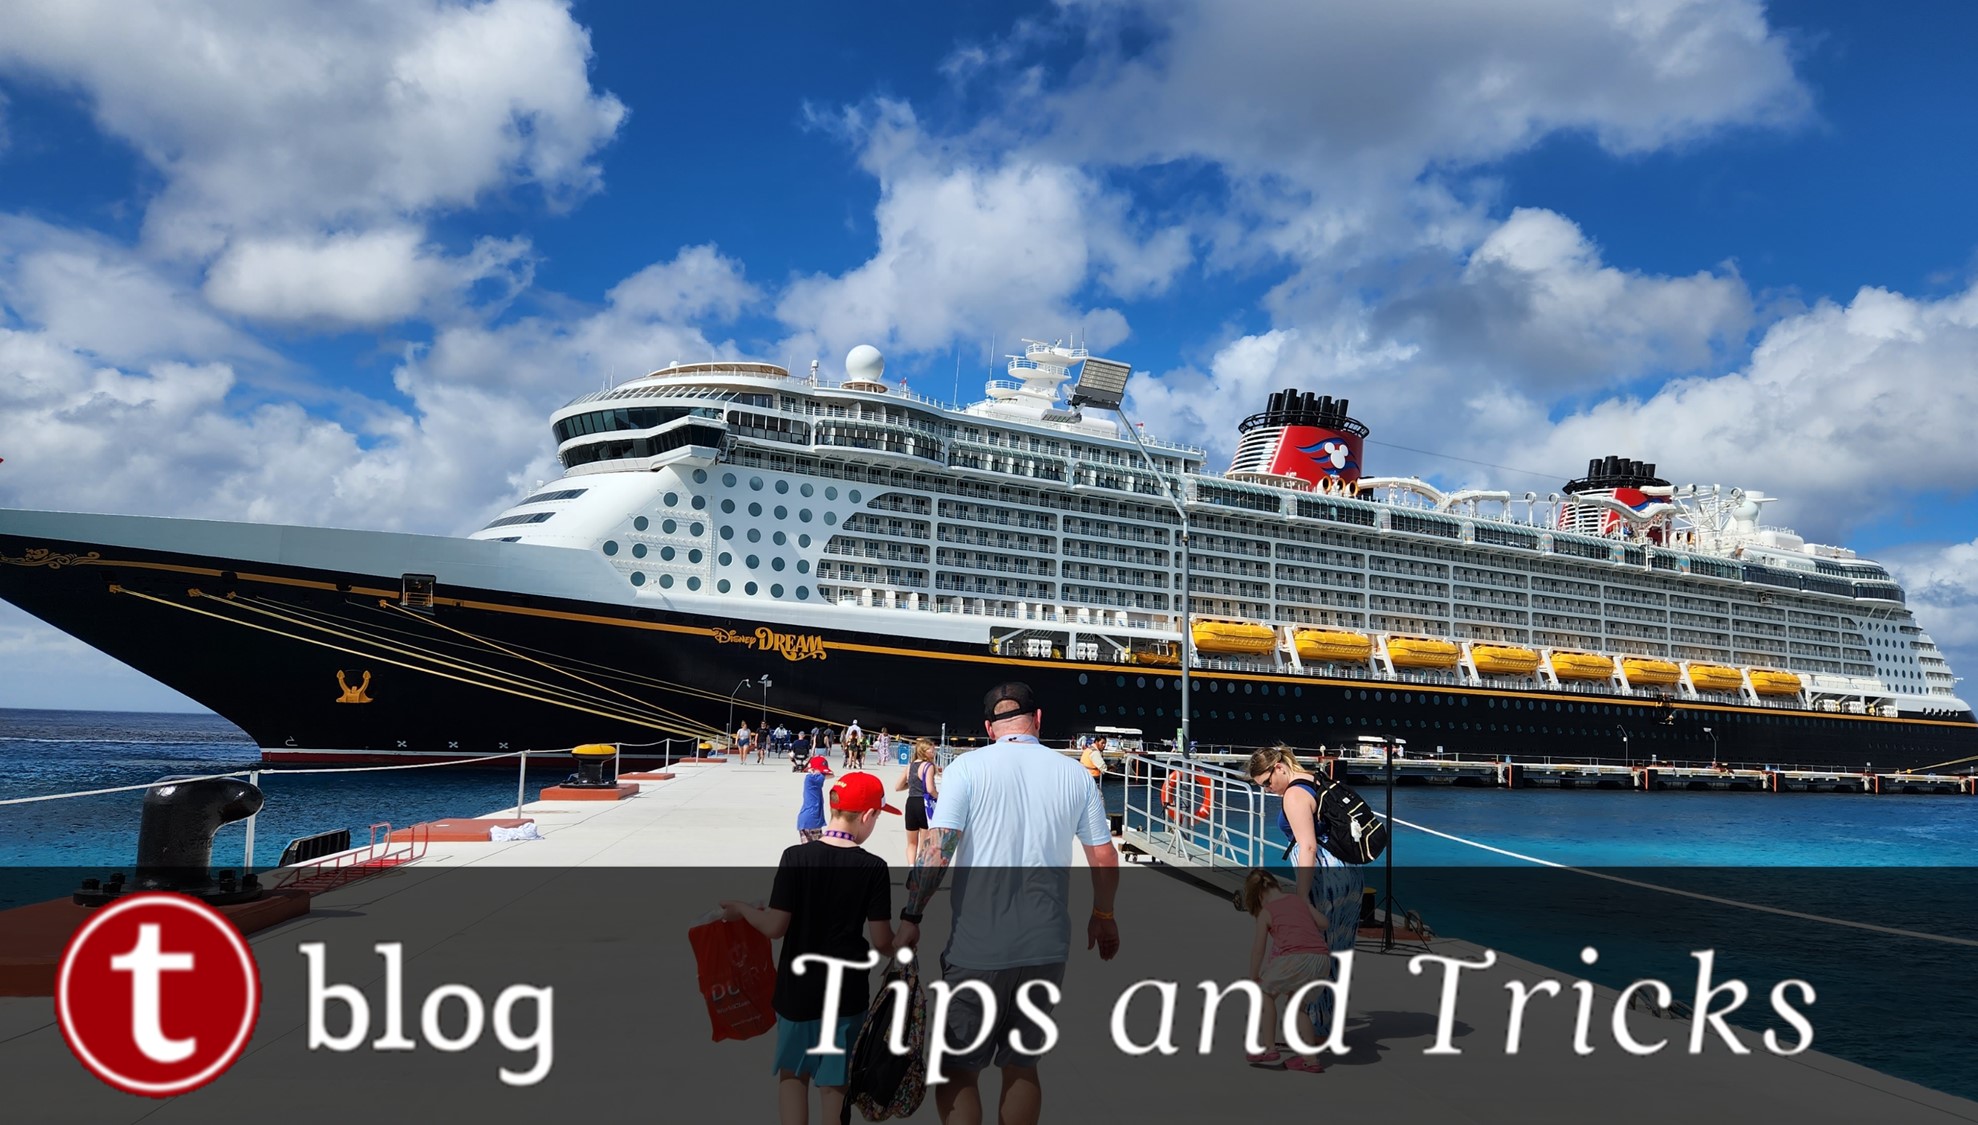 Pirate night - Disney Cruise Line - TouringPlans Discussion Forums